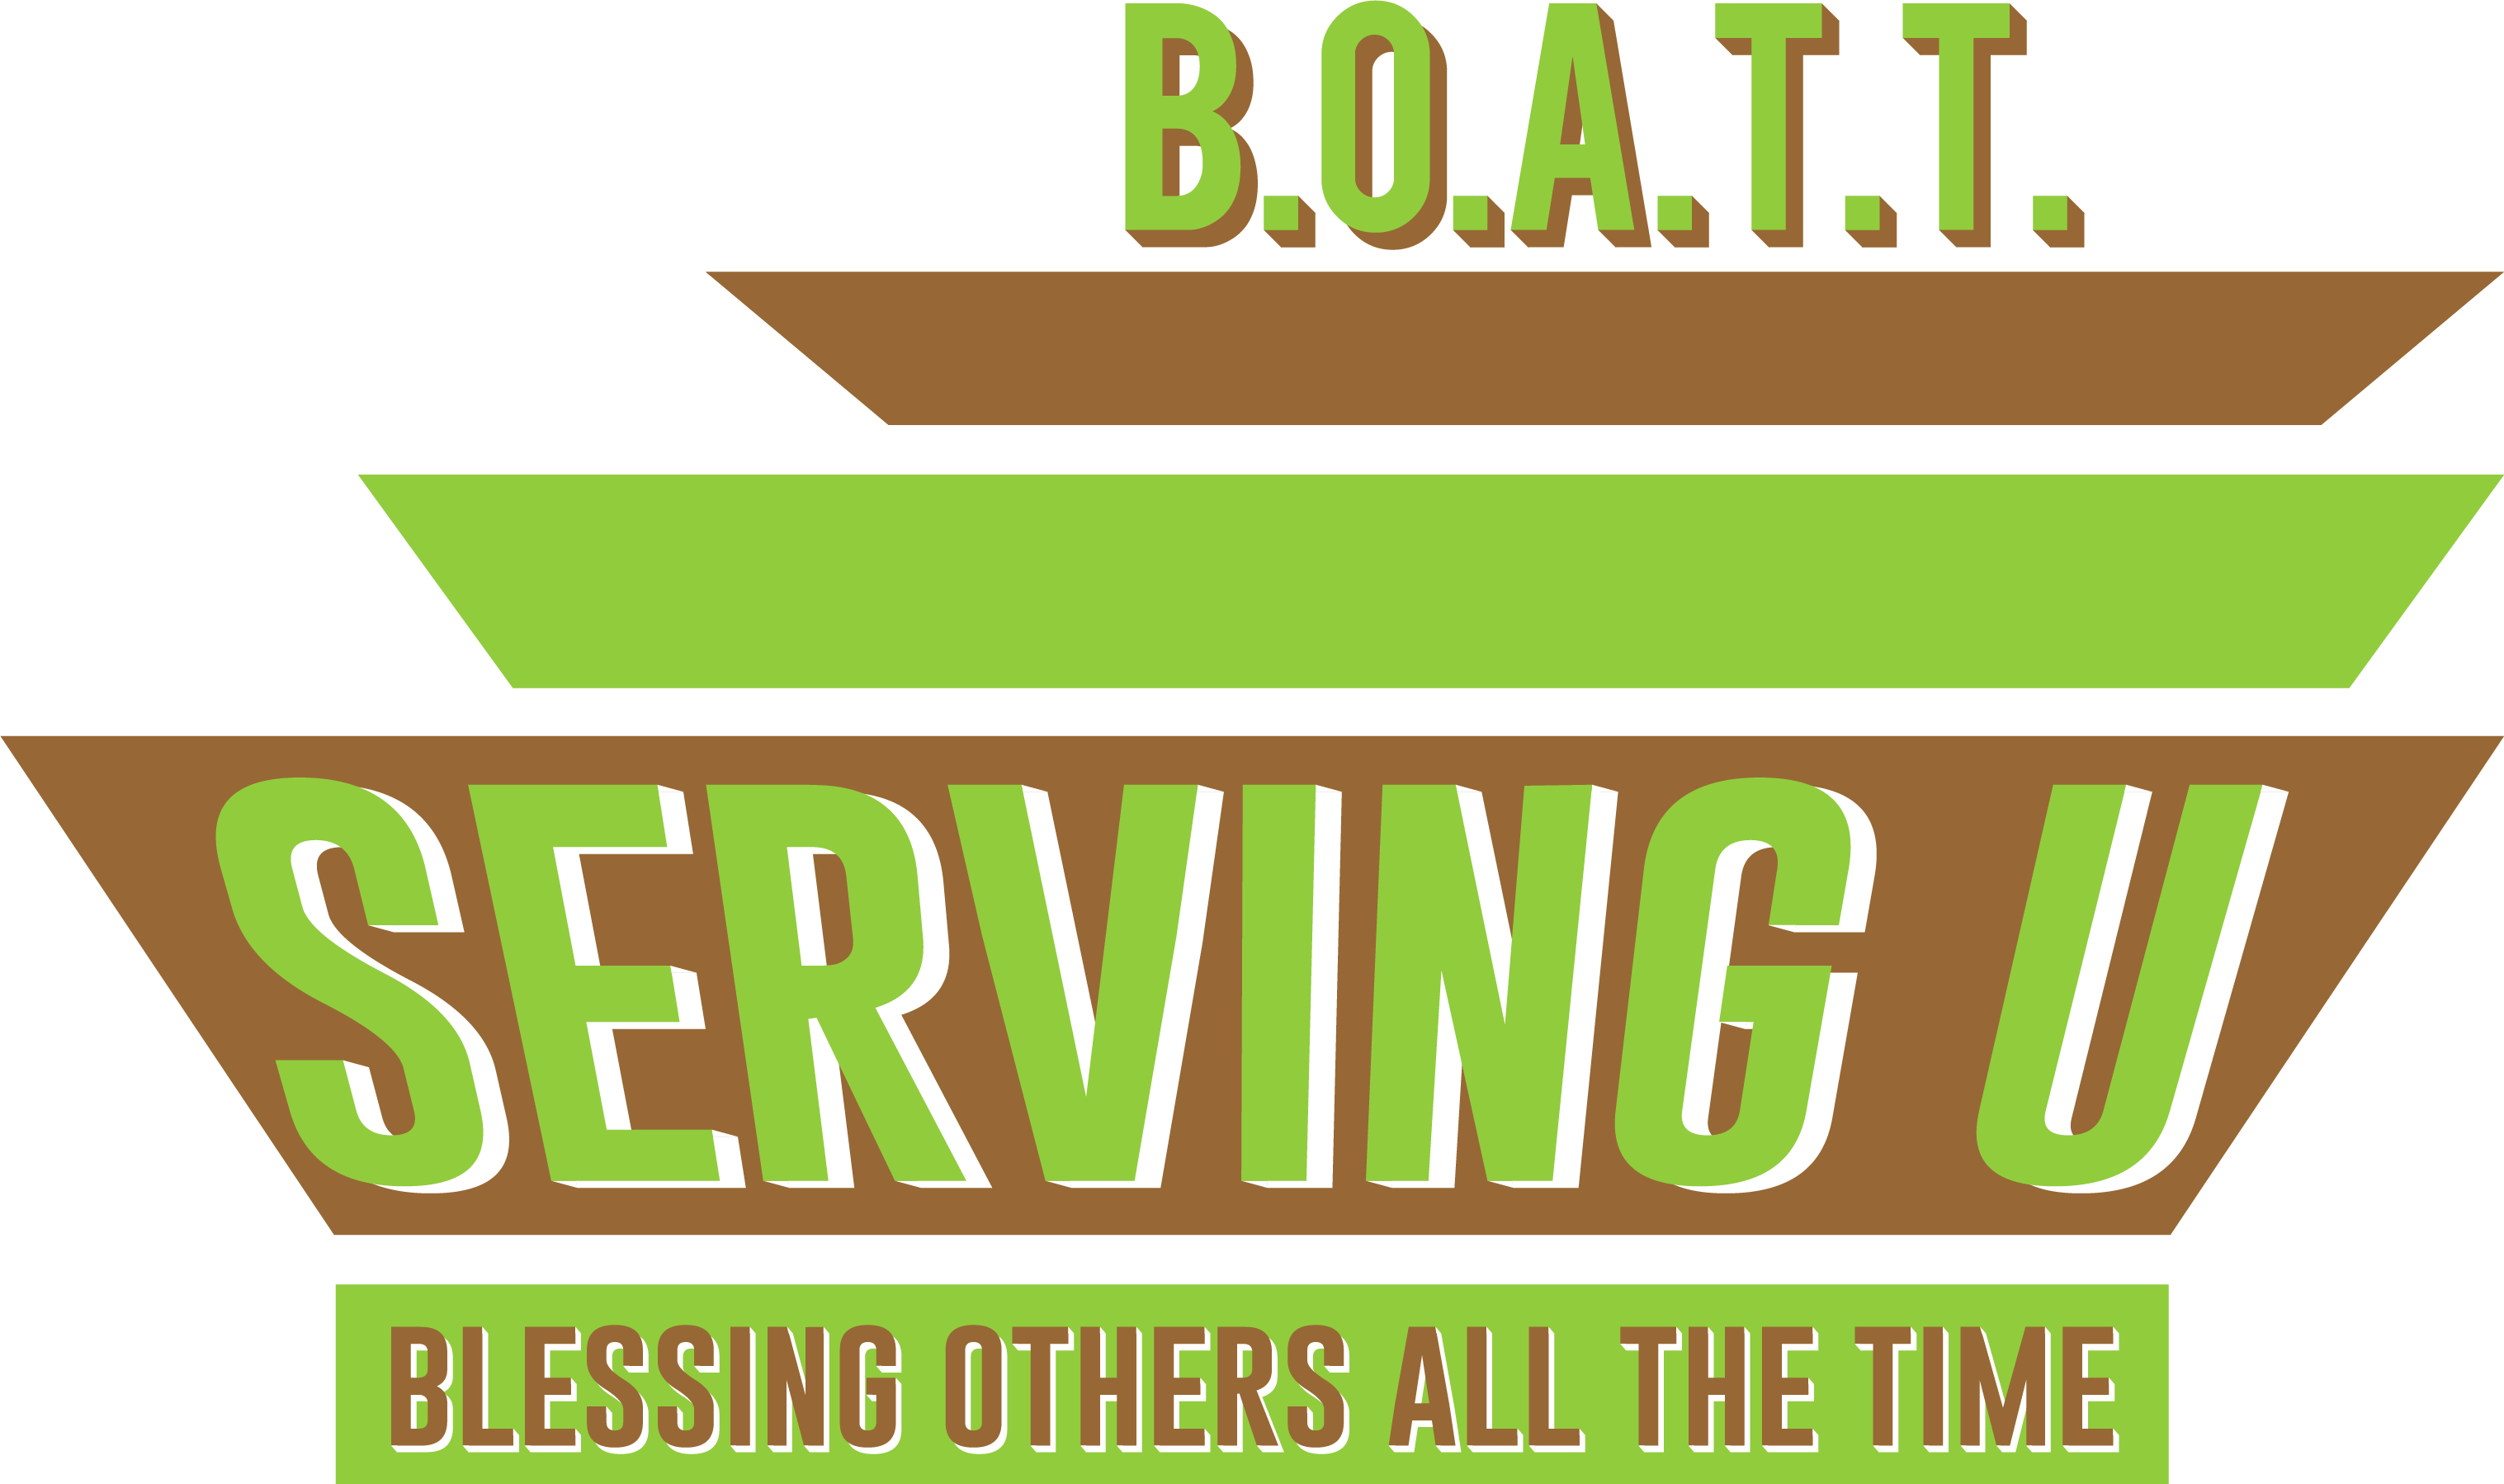 Blessing Others All The Time logo